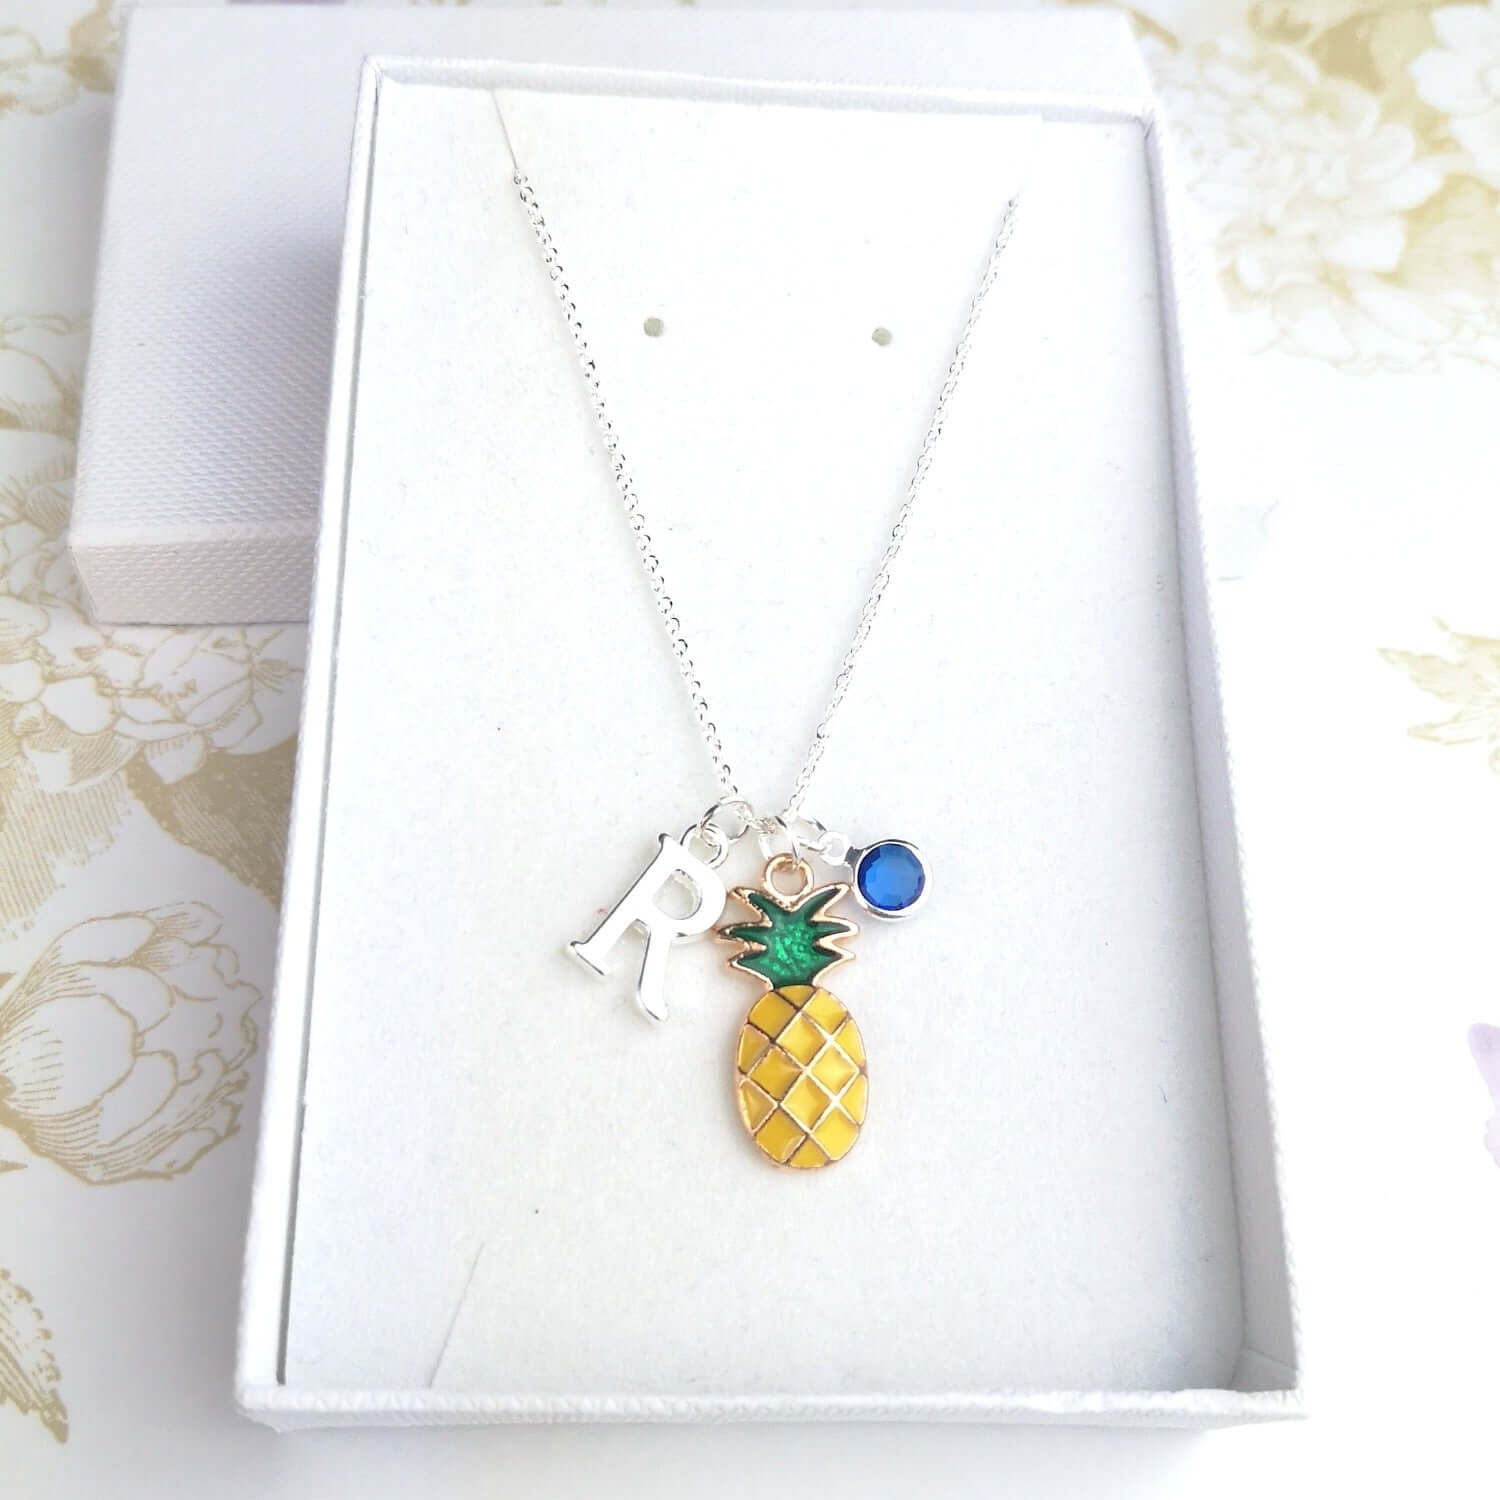 Personalised pineapple necklace in a gift box